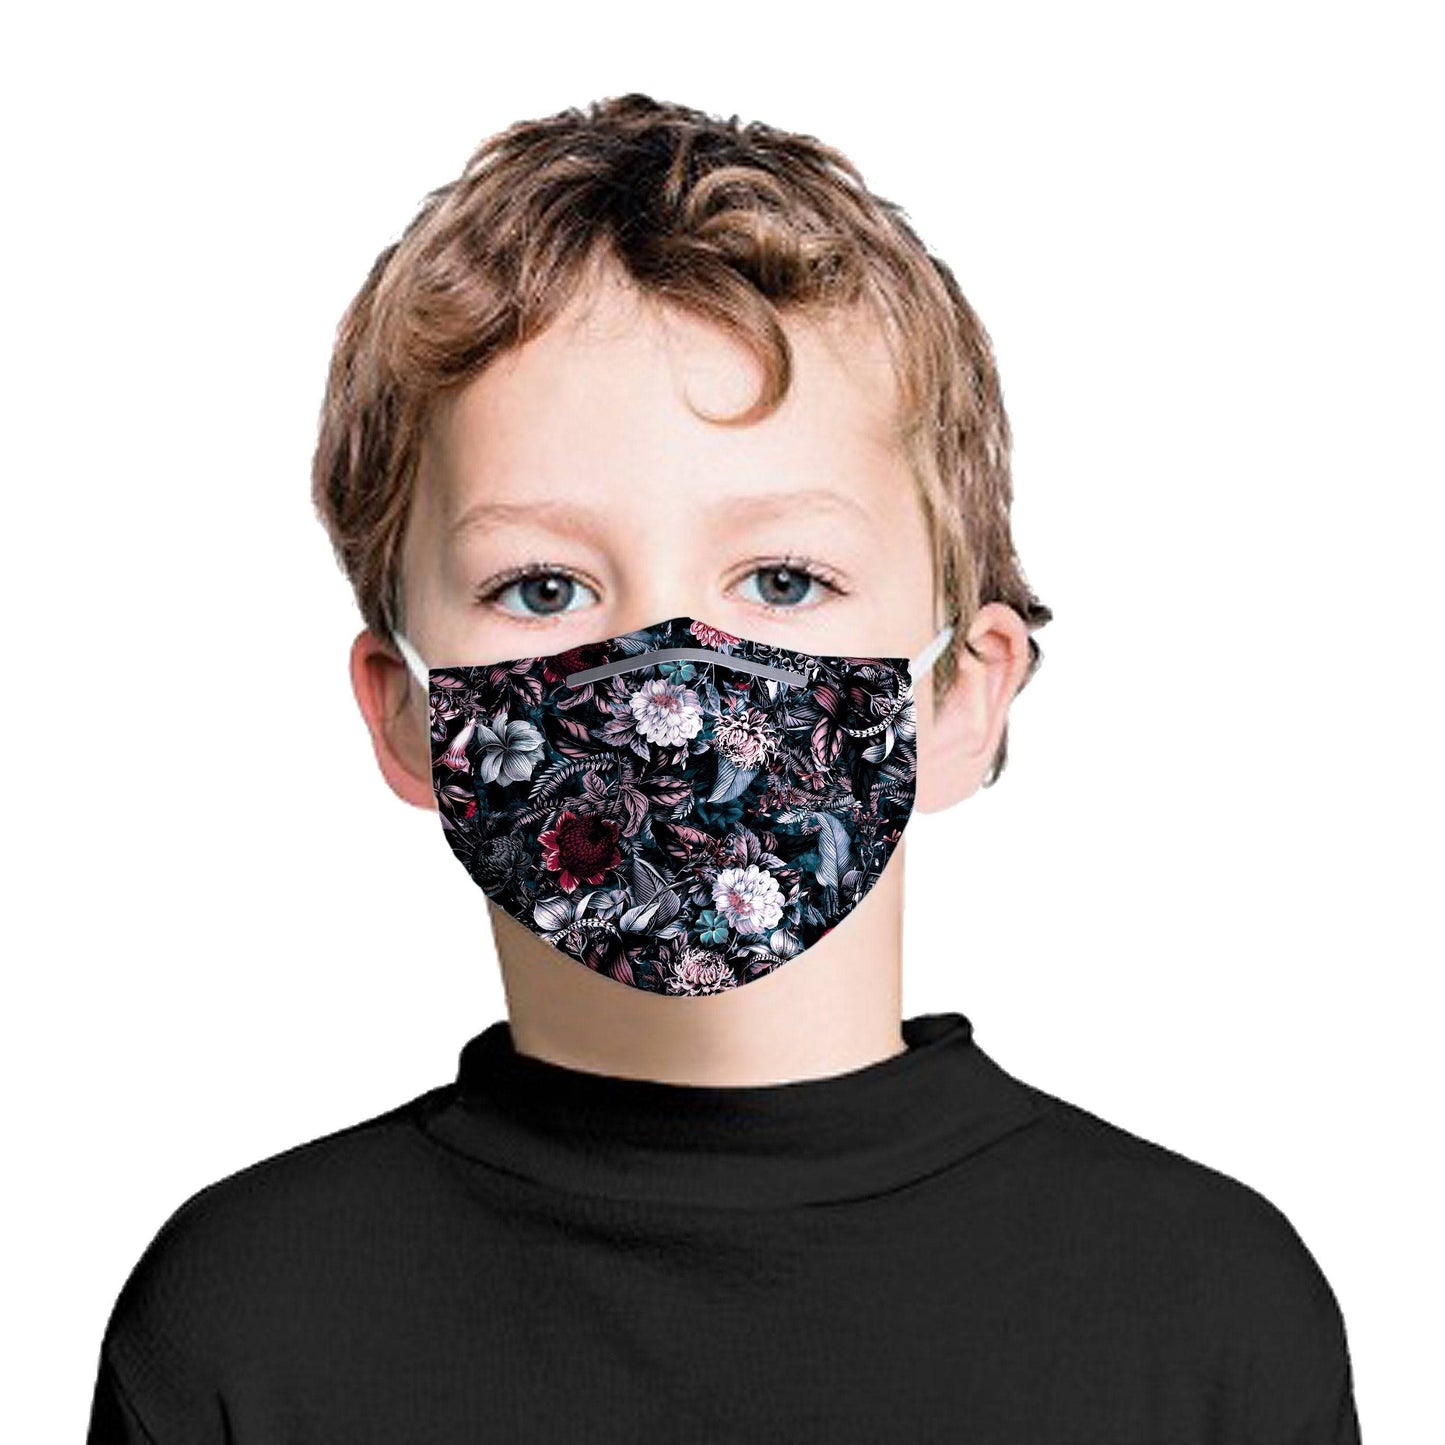 Blue Garden Kids Face Mask With (4) PM 2.5 Carbon Inserts, Riza Peker, | iEDM